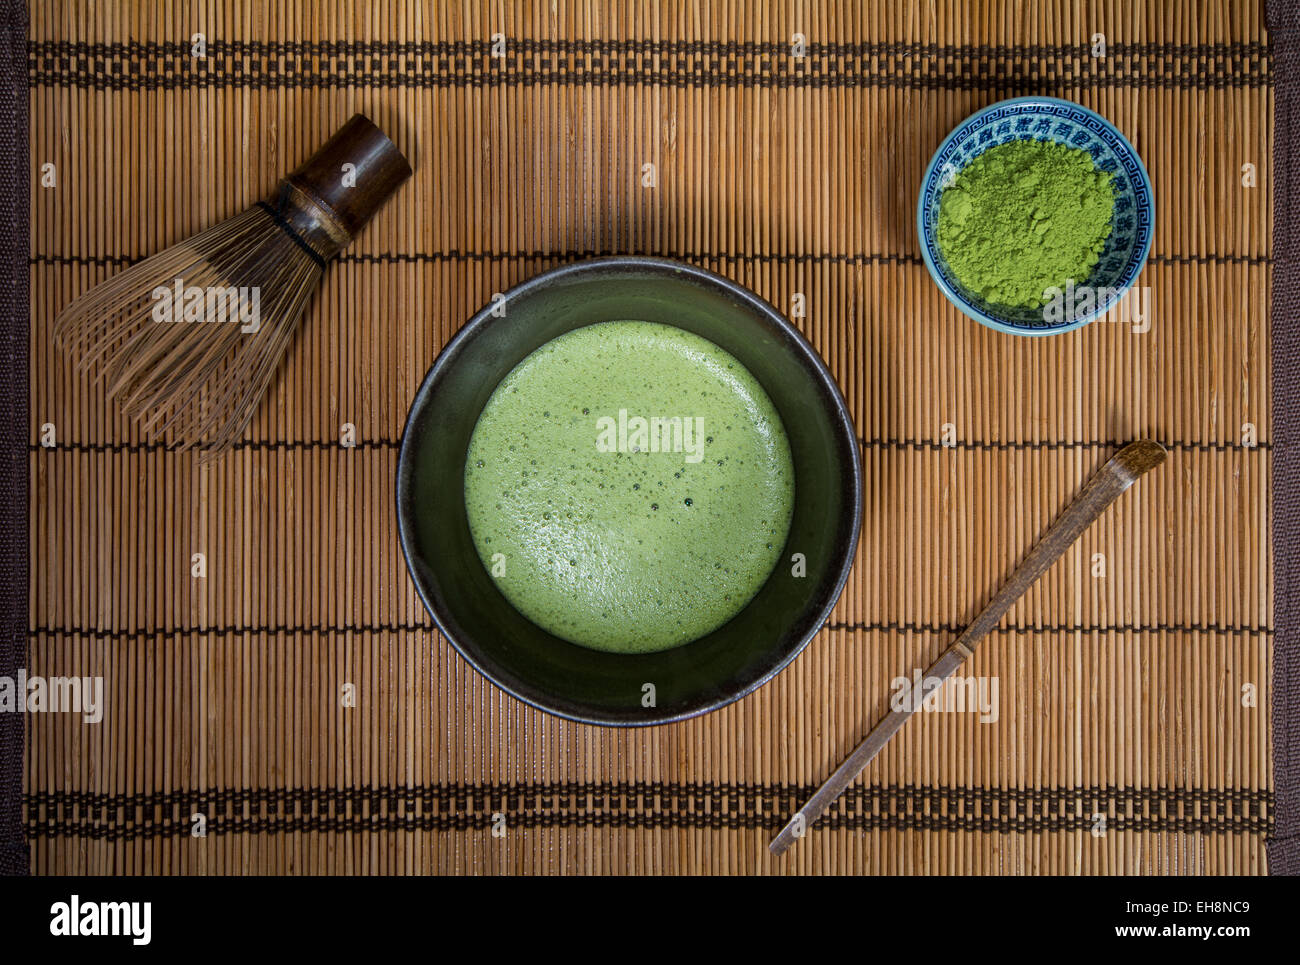 Bowl of Matcha with a Chasen a Chashaku and a bowl of Matcha powder on a place mat Stock Photo